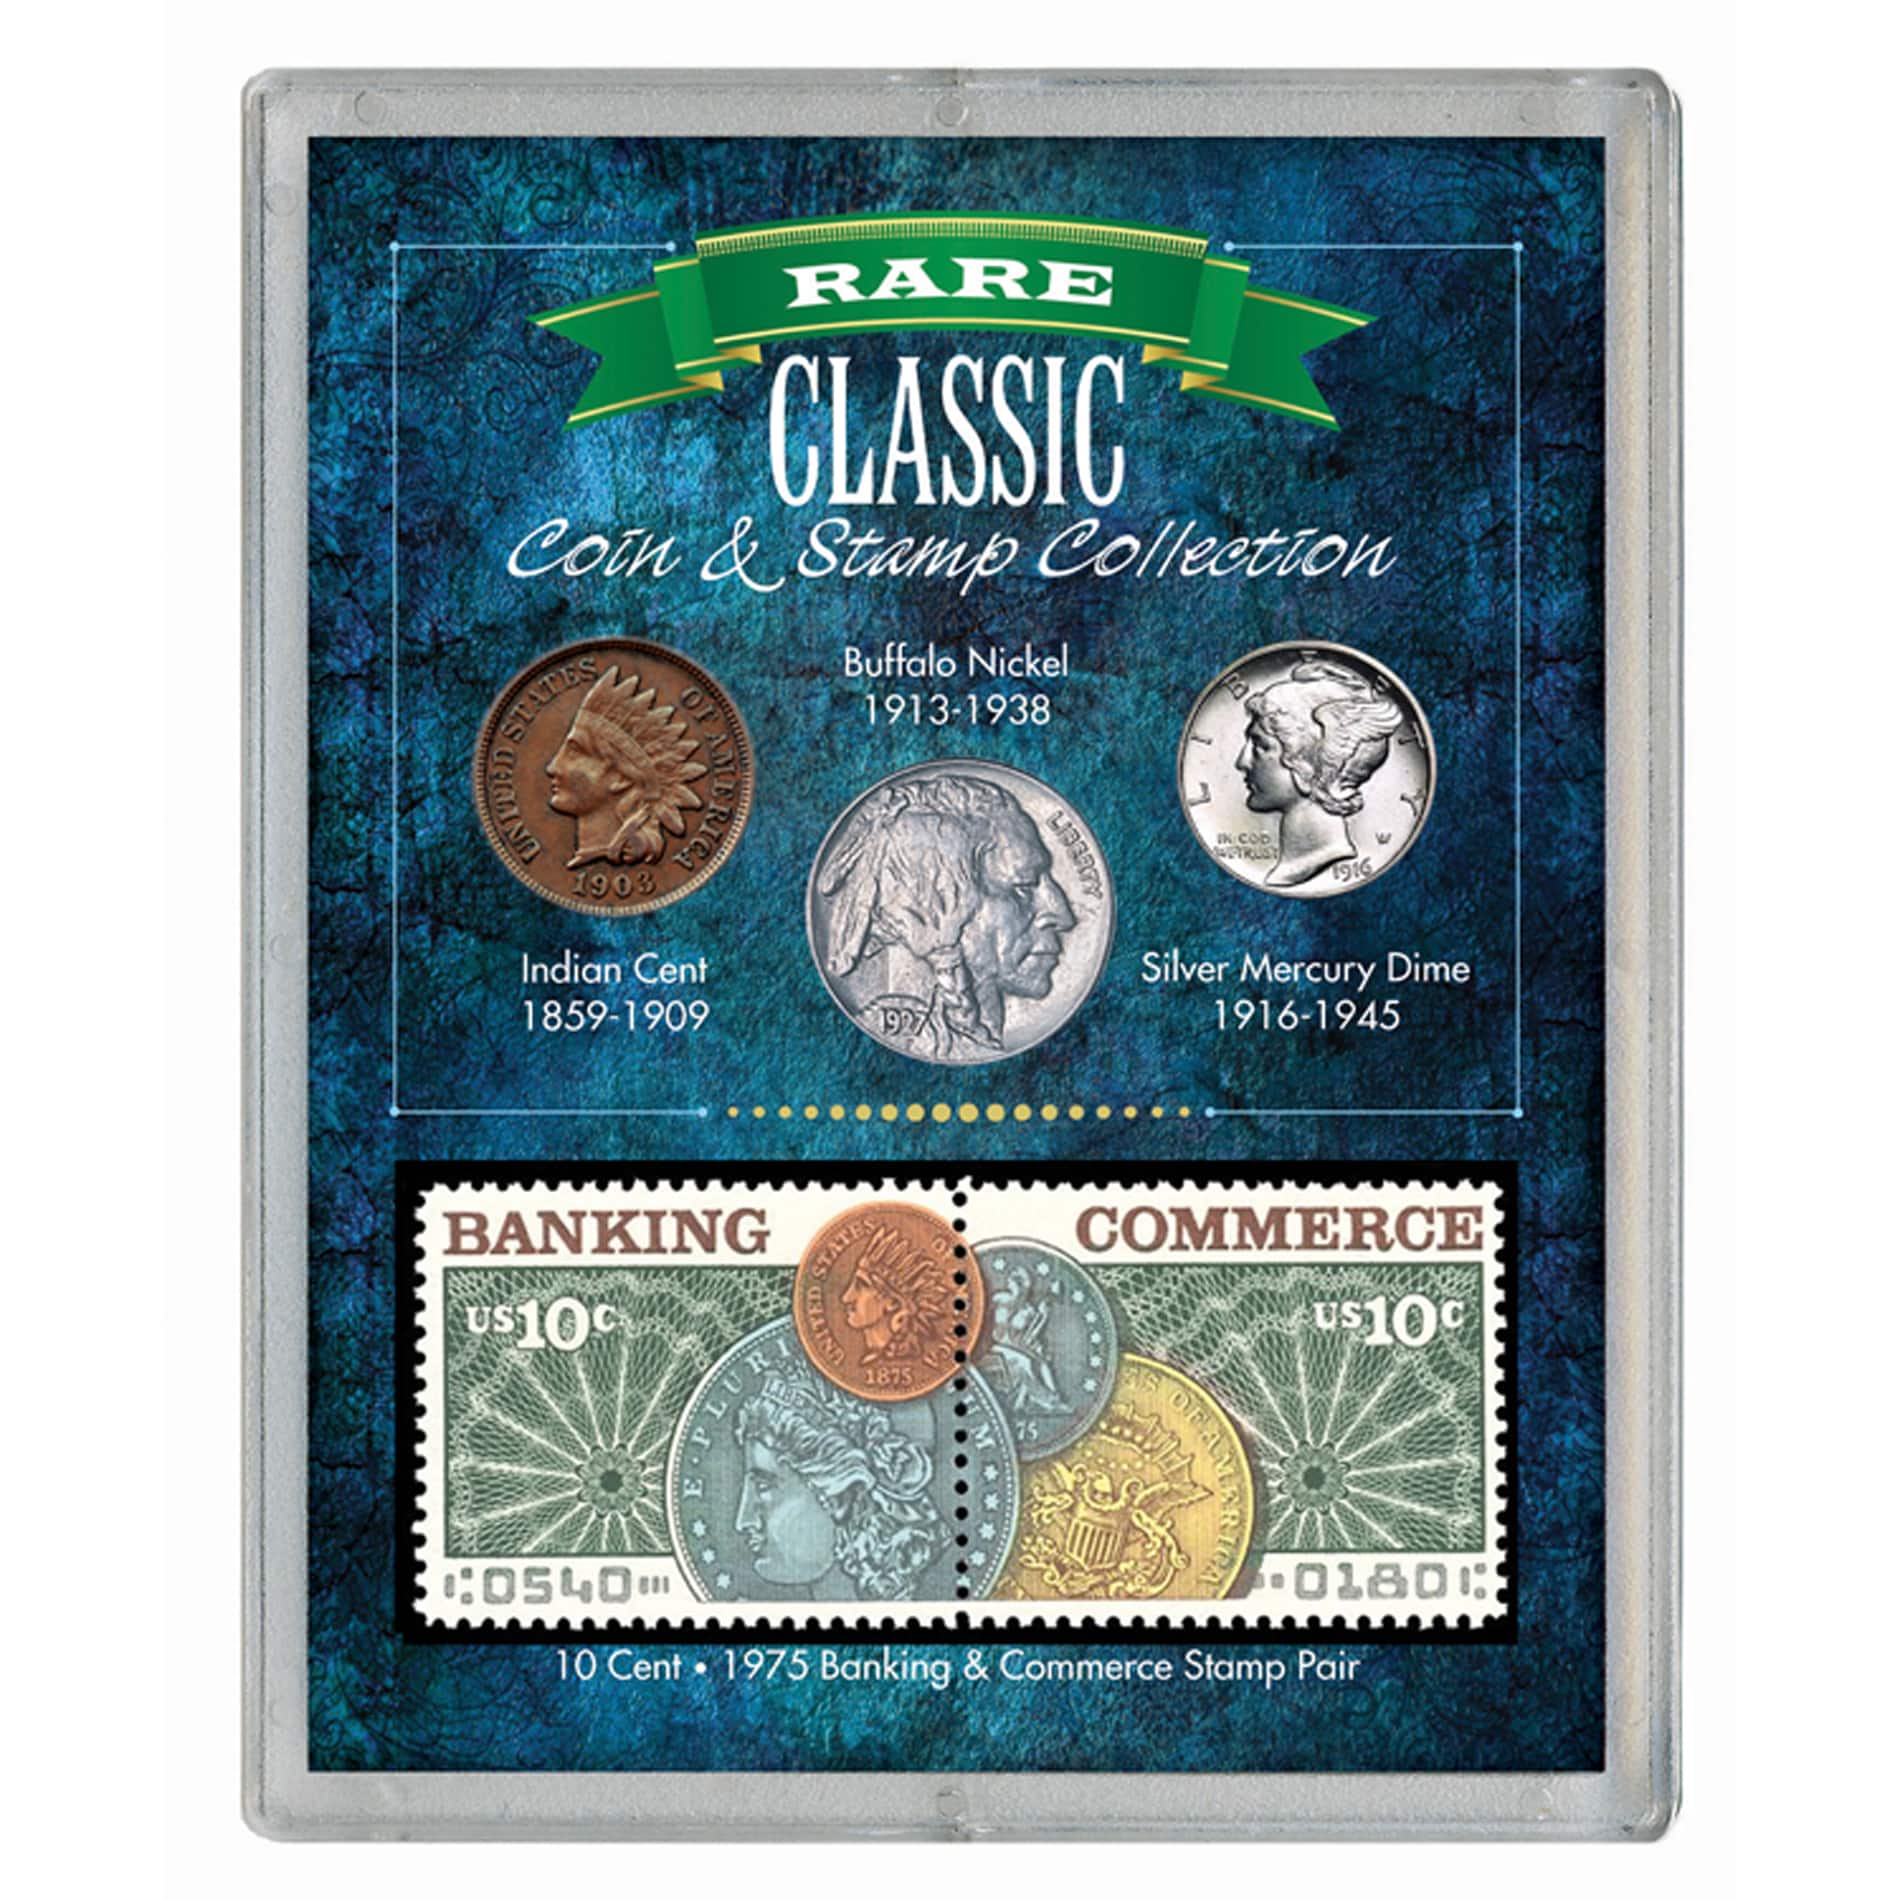 Explore and Learn the Collection Methodology of Coins, Stamps